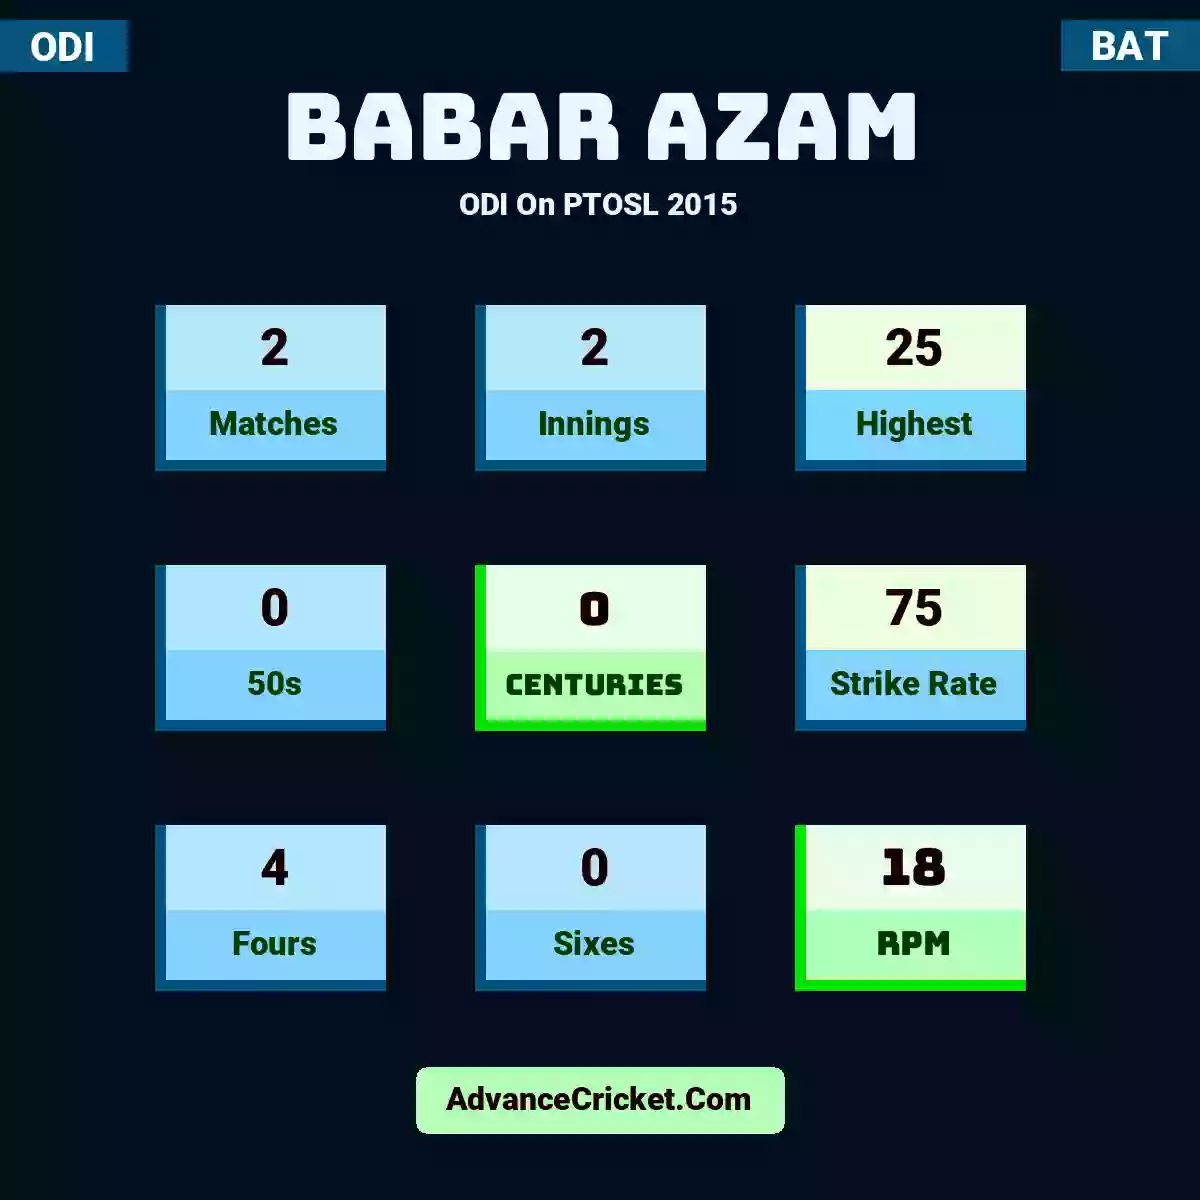 Babar Azam ODI  On PTOSL 2015, Babar Azam played 2 matches, scored 25 runs as highest, 0 half-centuries, and 0 centuries, with a strike rate of 75. B.Azam hit 4 fours and 0 sixes, with an RPM of 18.